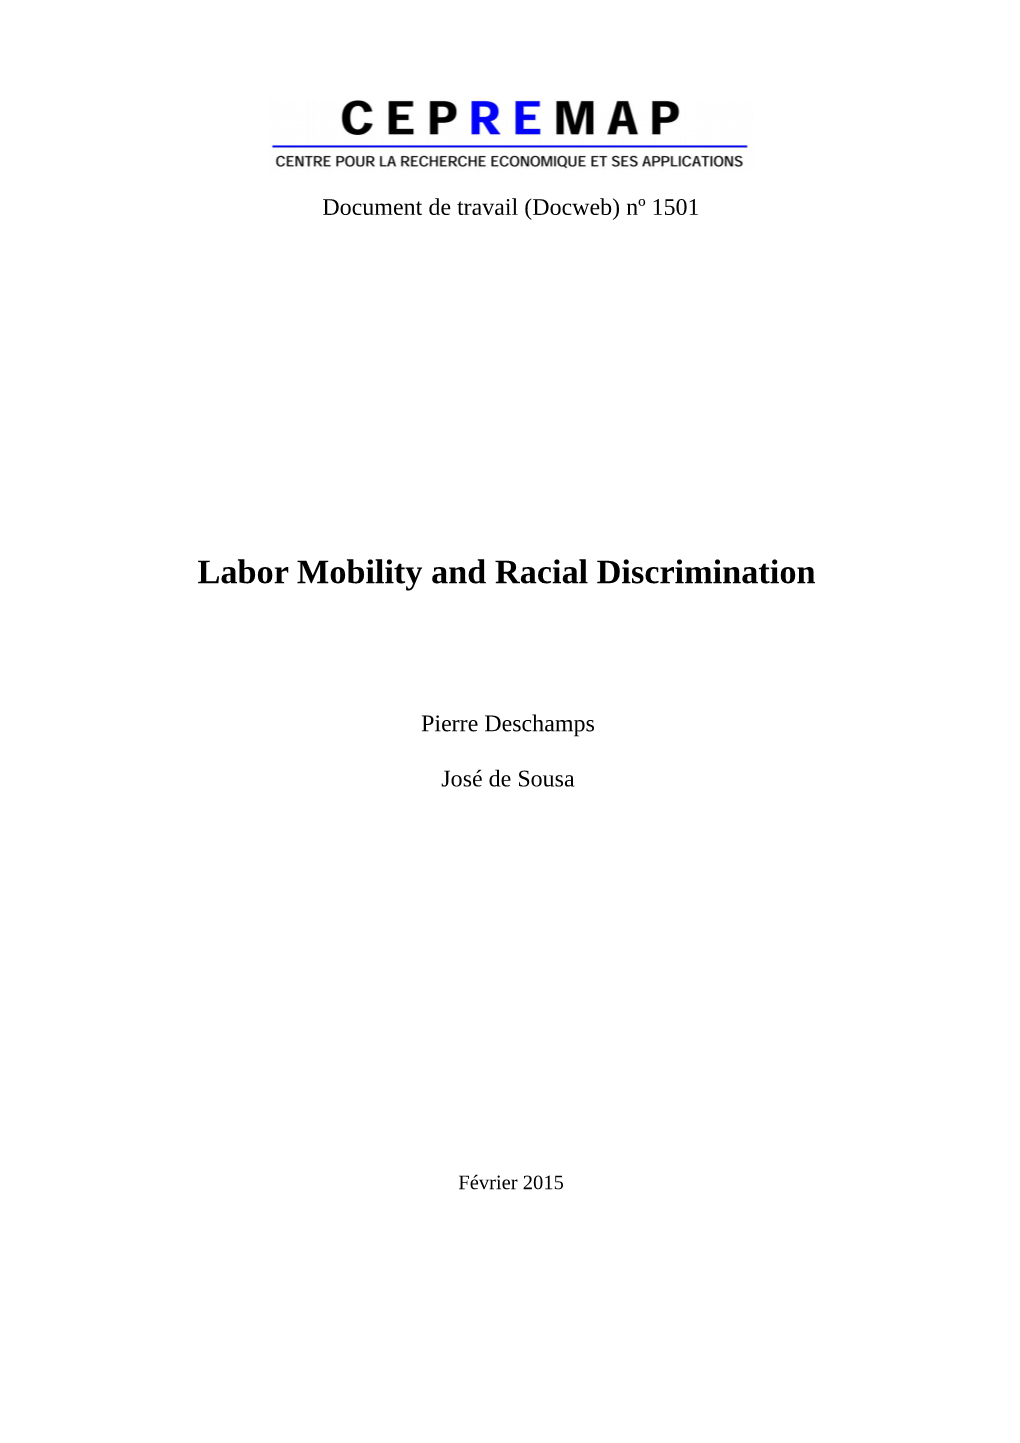 Labor Mobility and Racial Discrimination